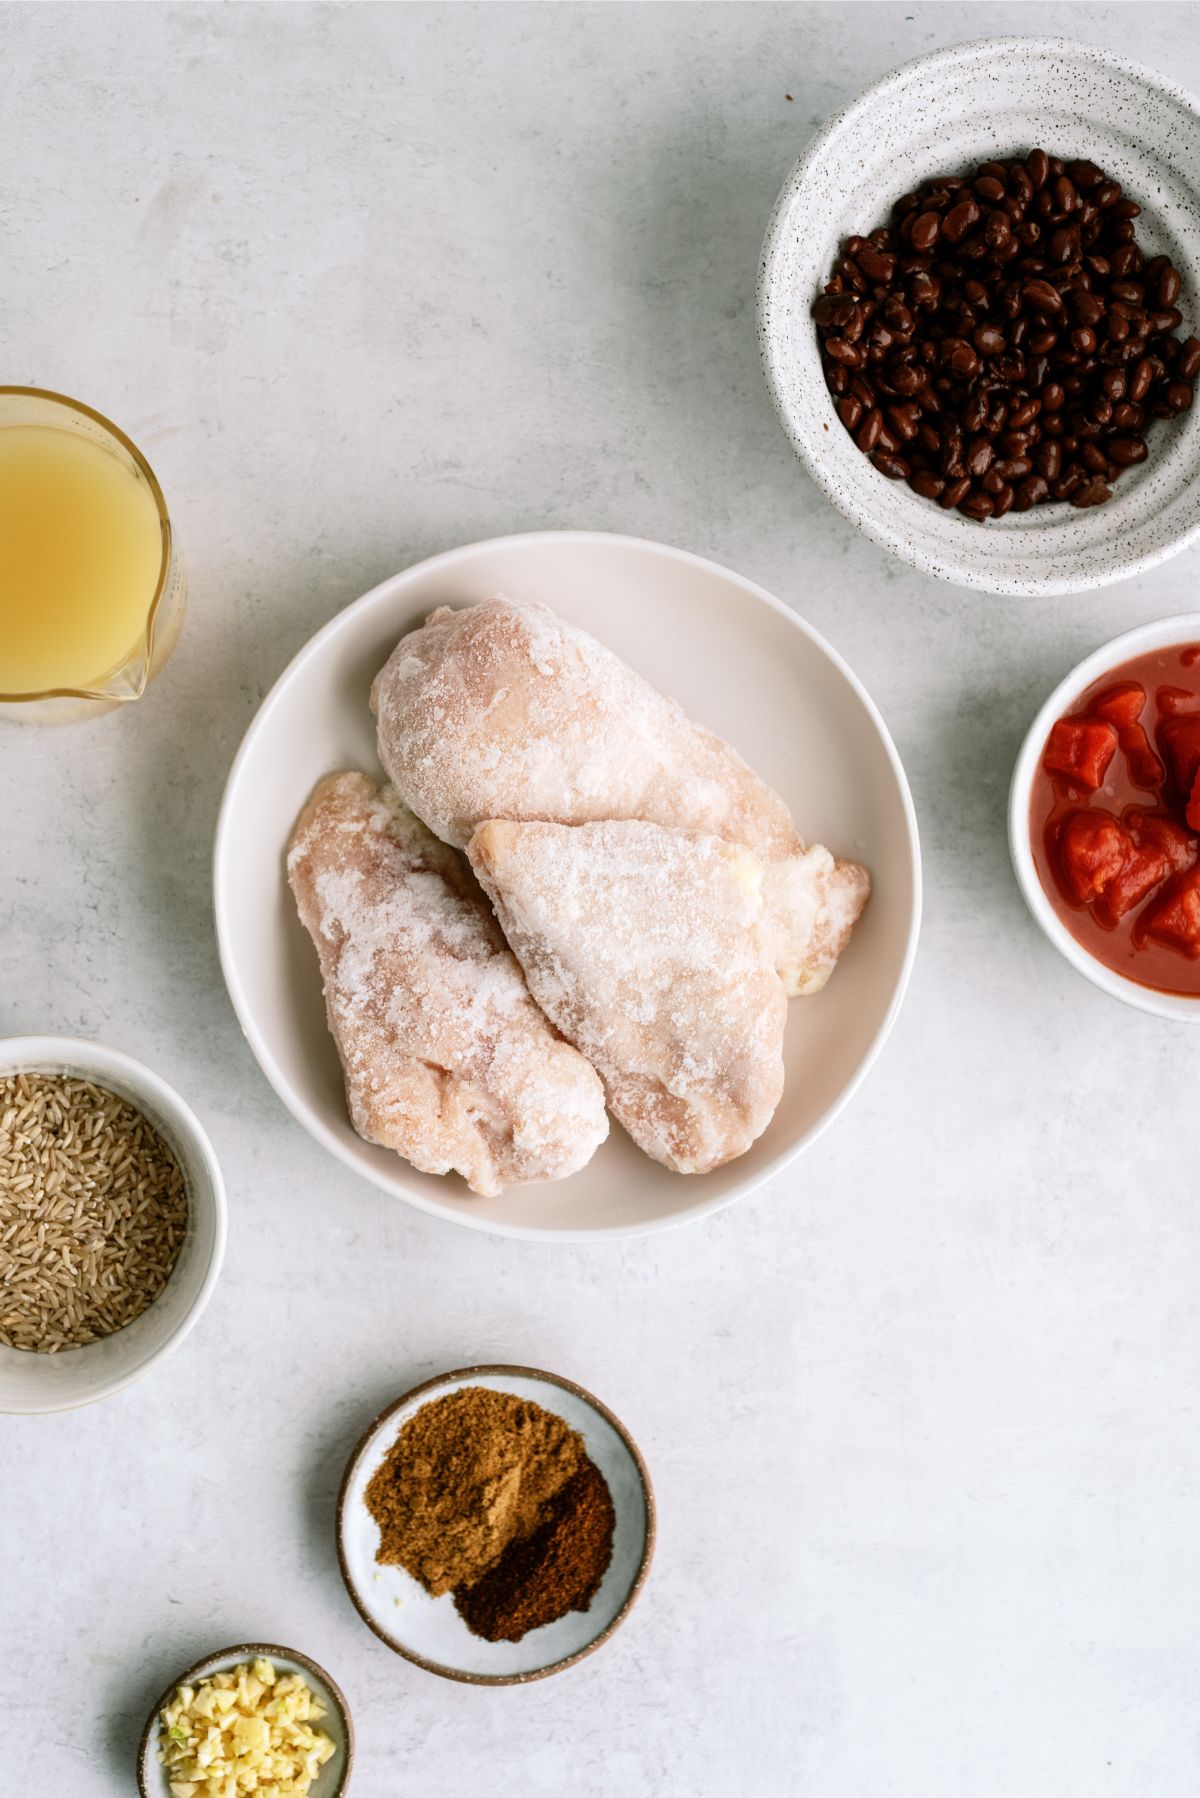 Ingredients for Instant Pot Chicken Burrito Bowls